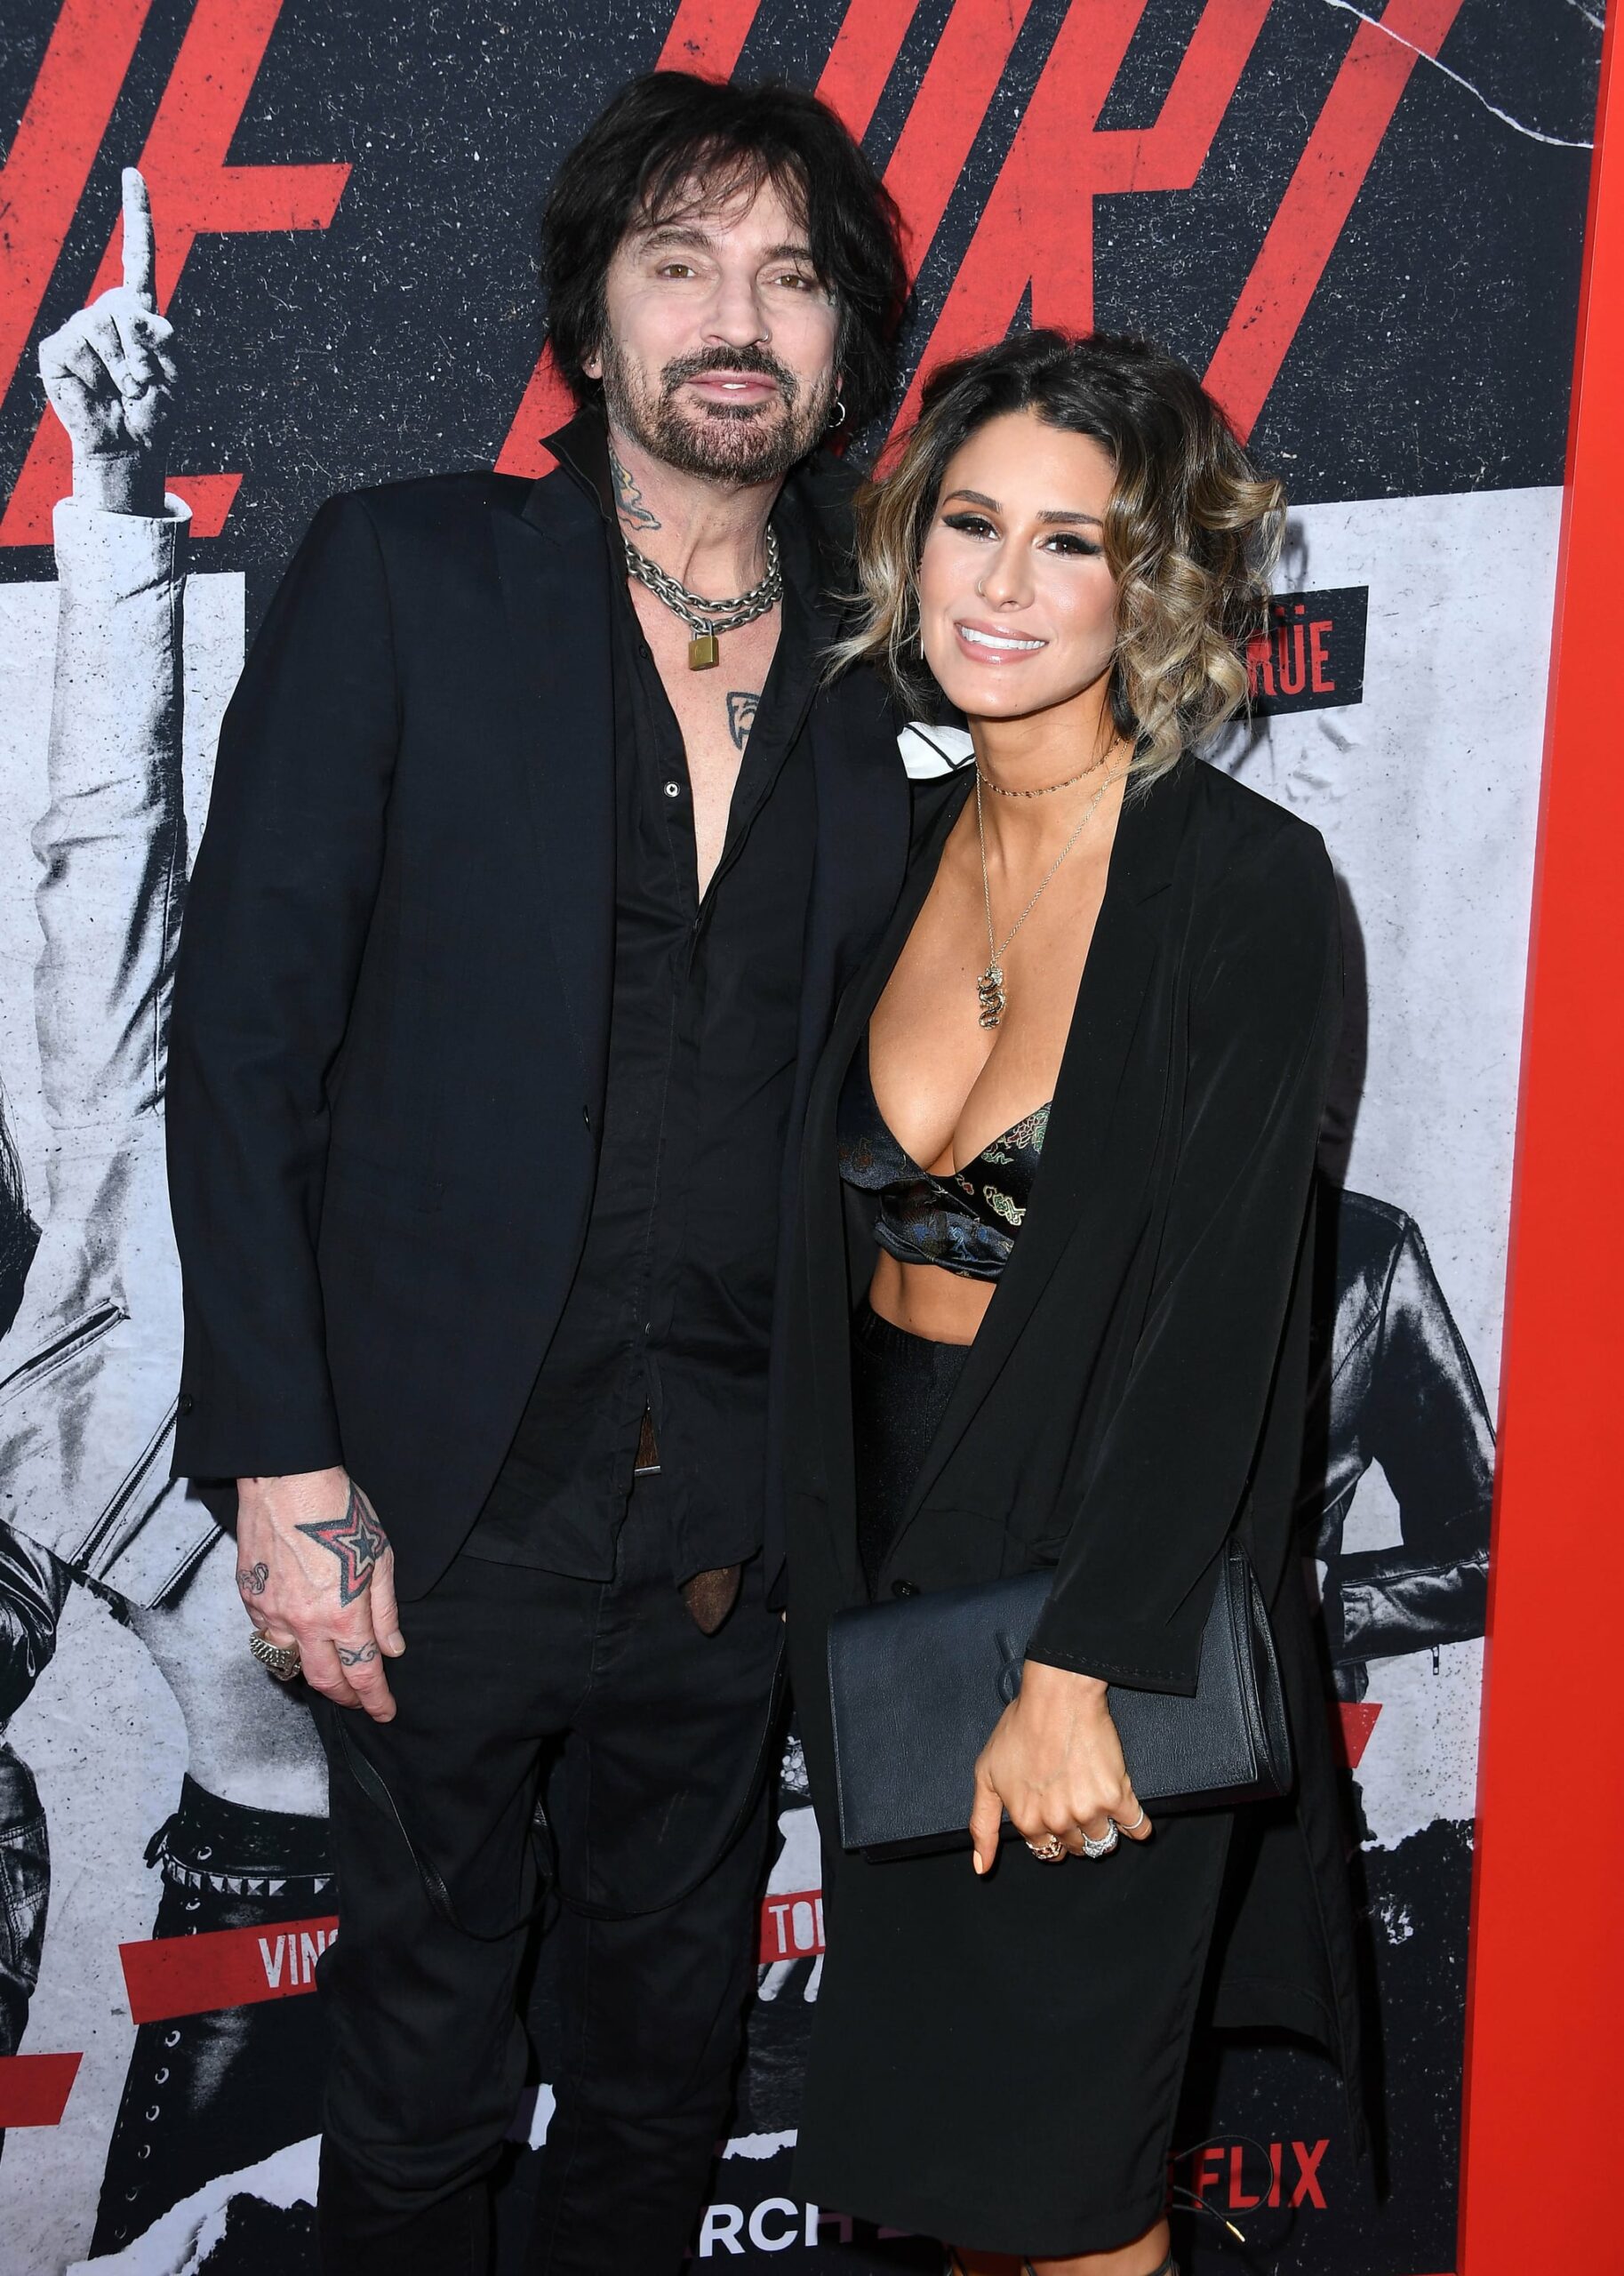 HOLLYWOOD, CALIFORNIA - MARCH 18: Tommy Lee and Brittany Furlan arrive at the Premiere Of Netflix